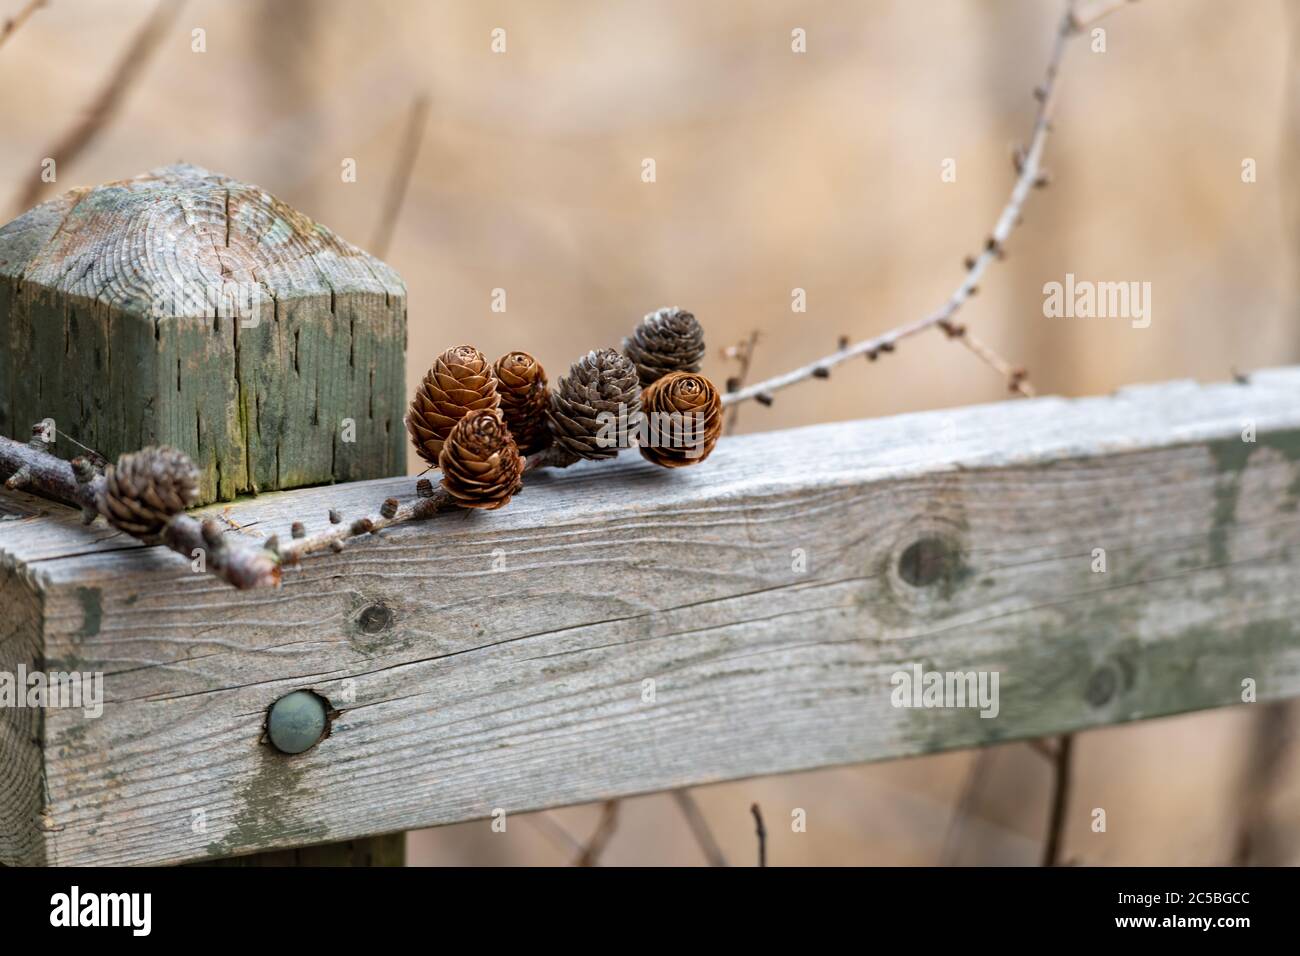 A douglas fir tree branch laying on a wooden fence paling near a fence post. Stock Photo